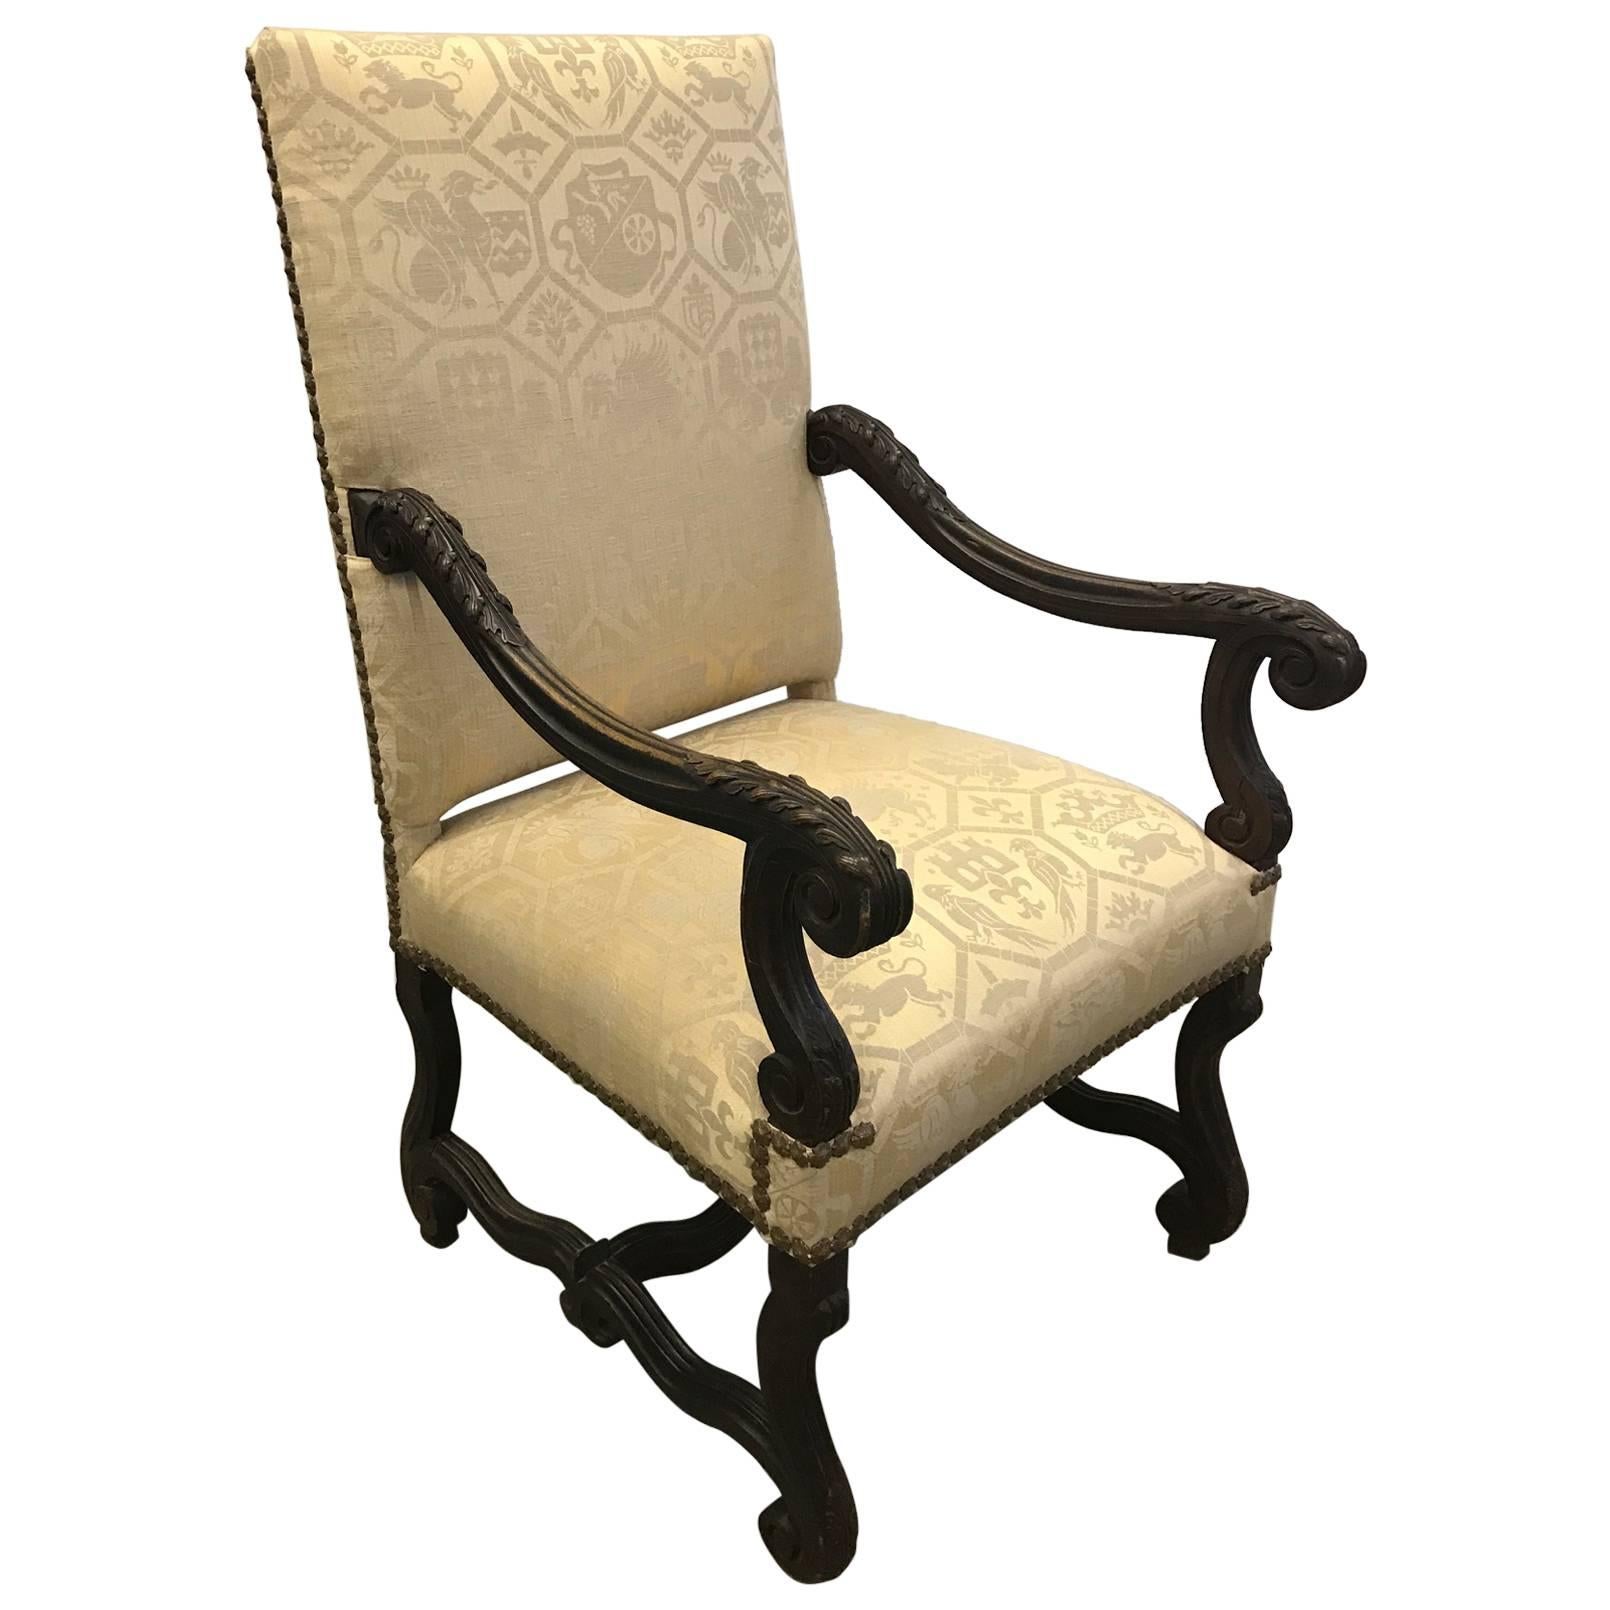 English Carved Walnut Throne Lolling Chair with Brass Nailhead Trim